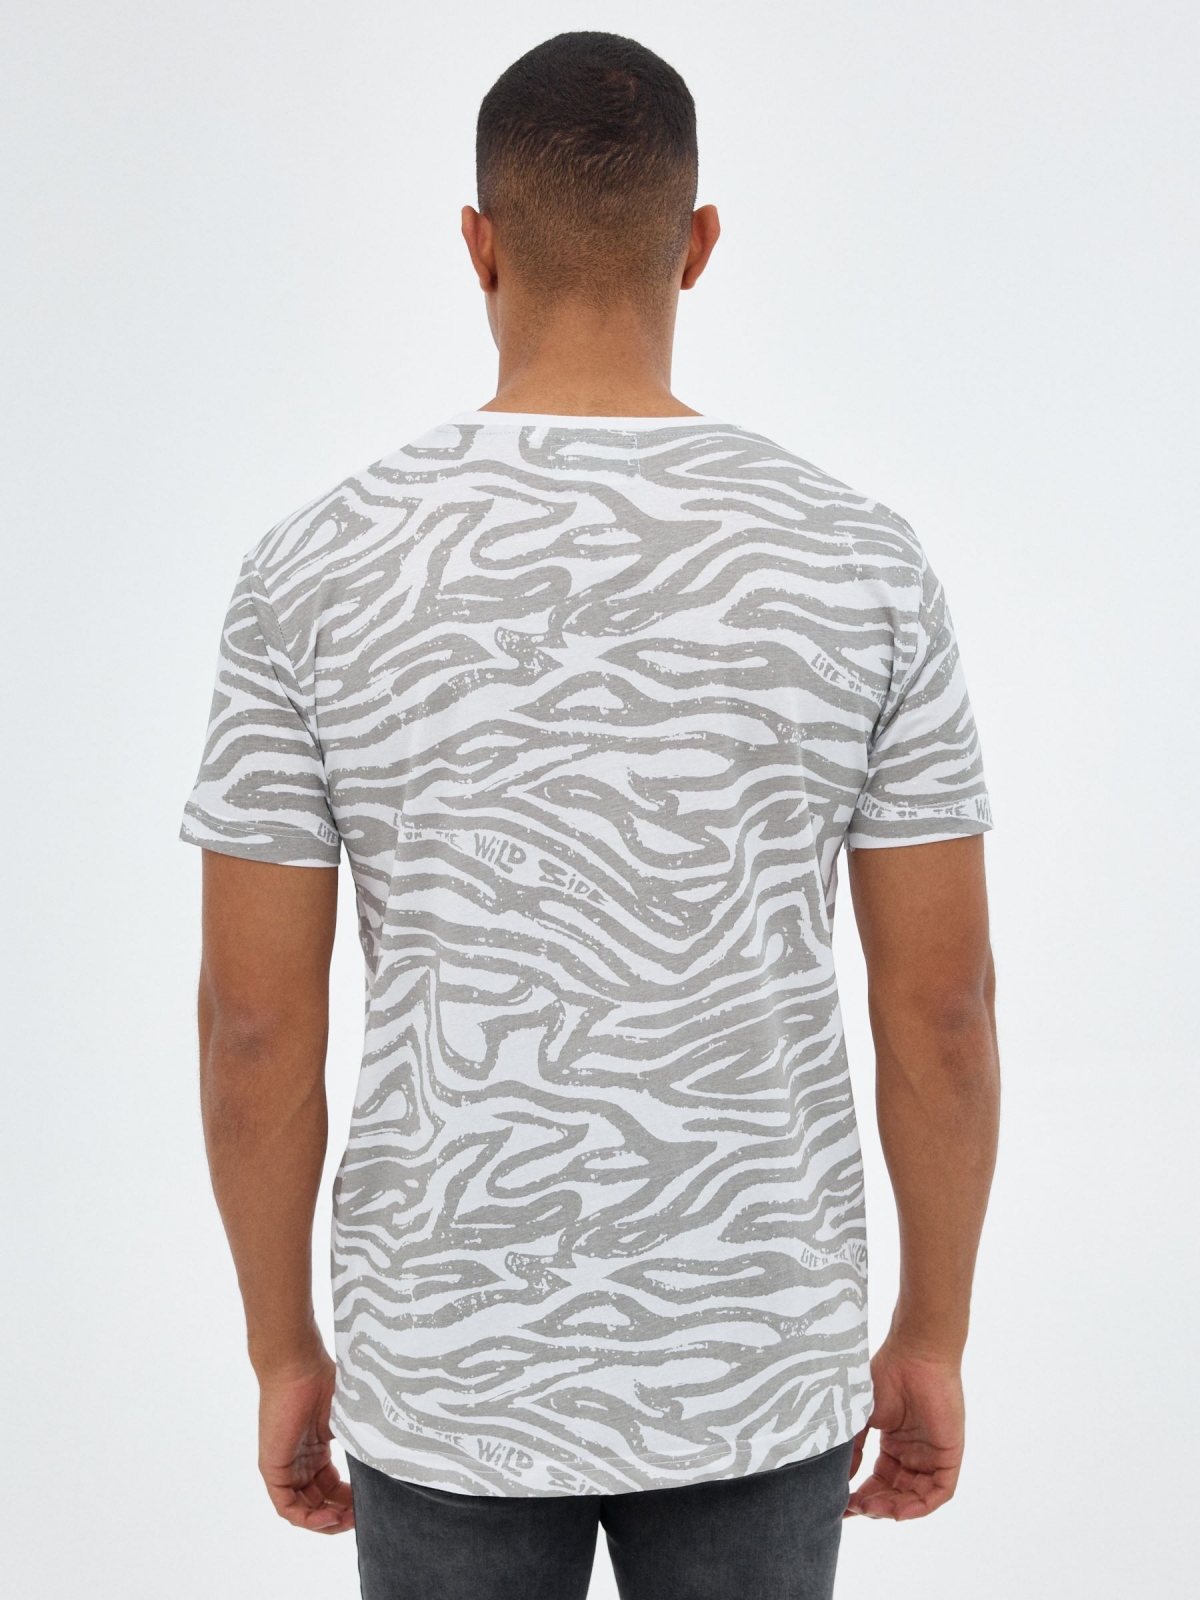 Graphic print t-shirt white middle back view